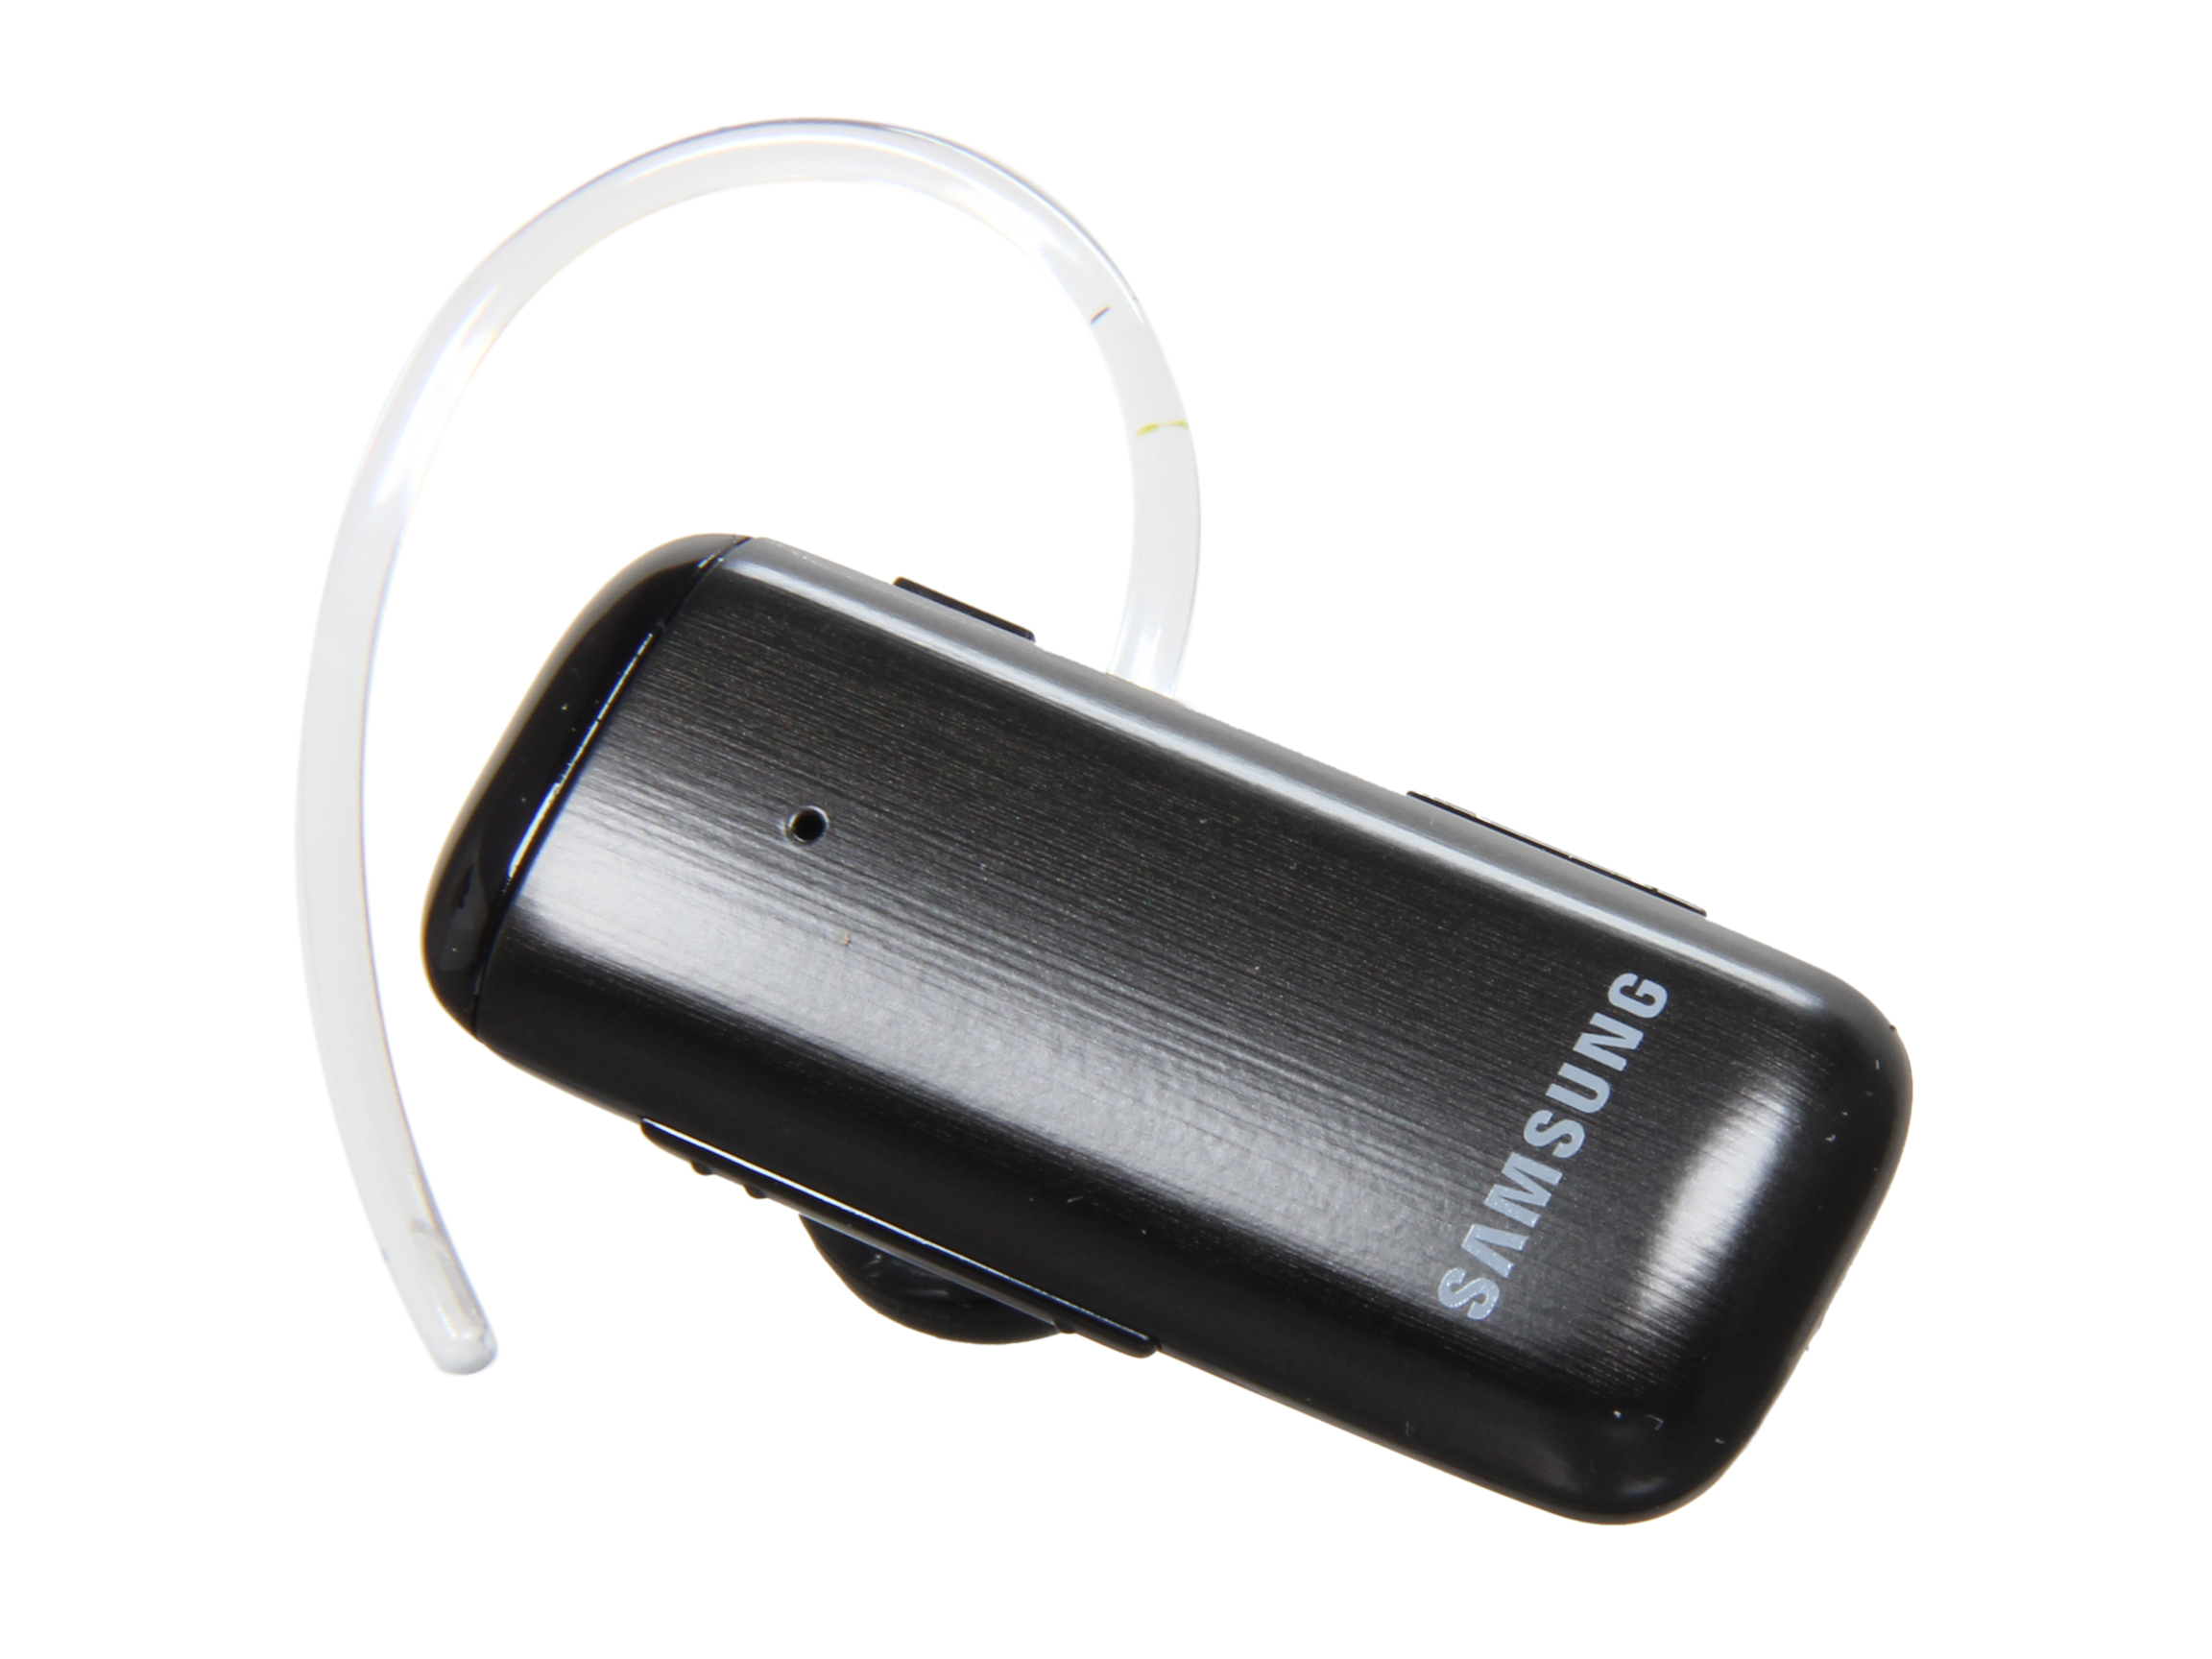 Samsung Stereo Bluetooth Headset w/ Android Apps Support / Voice Command / Text to Speech / Caller ID (HM3700)